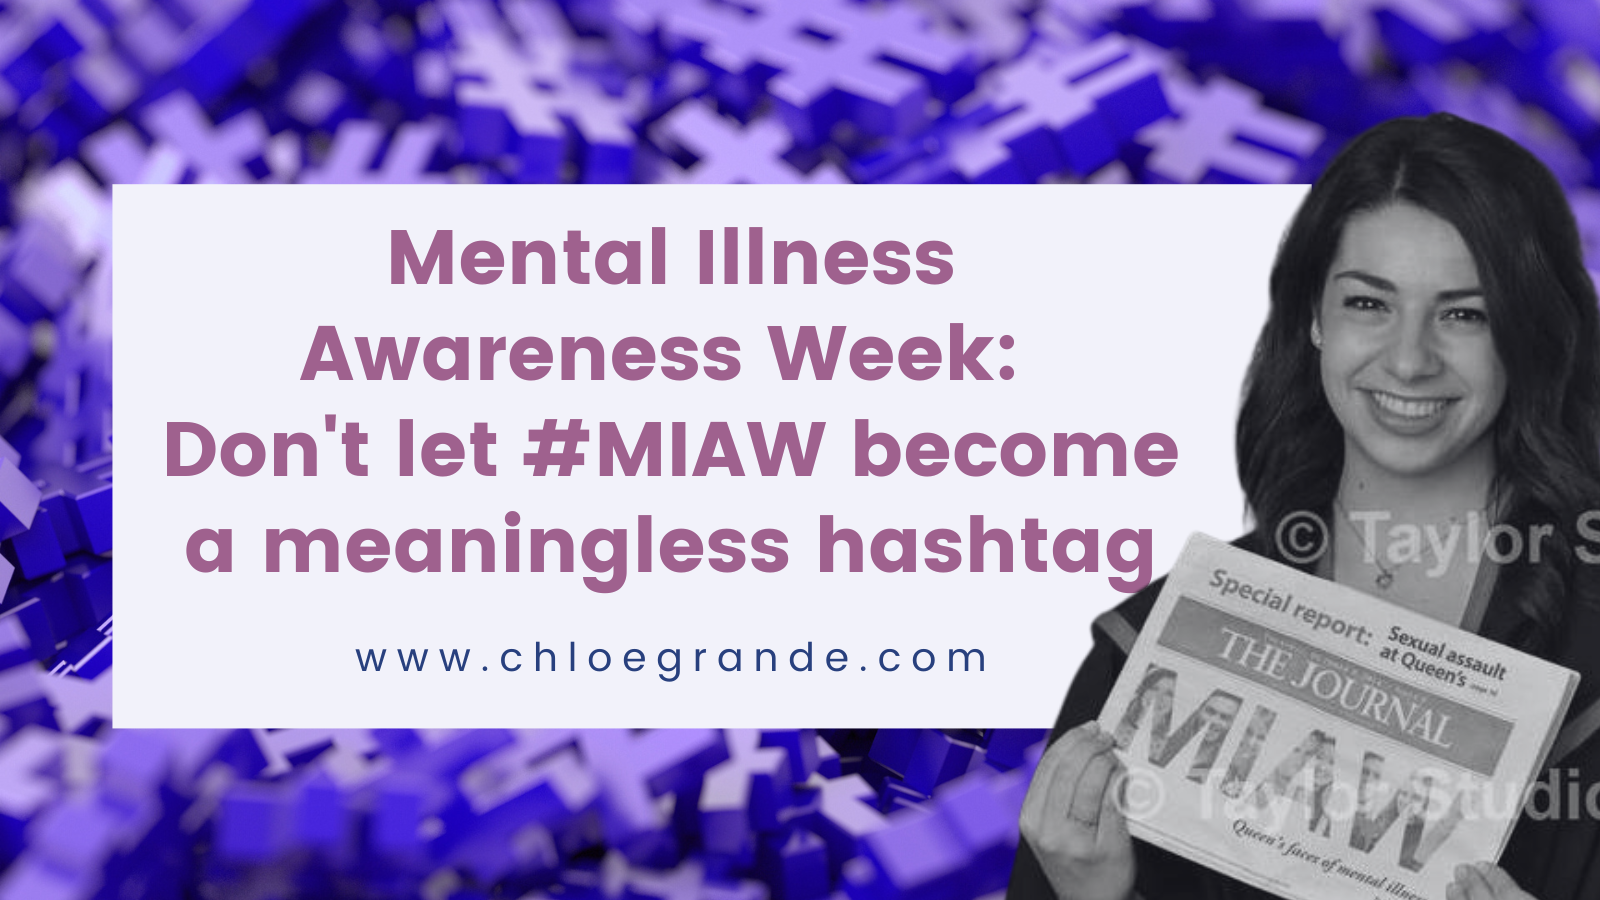 Mental Illness Awareness Week: Don't let MIAW become a meaningless hashtag